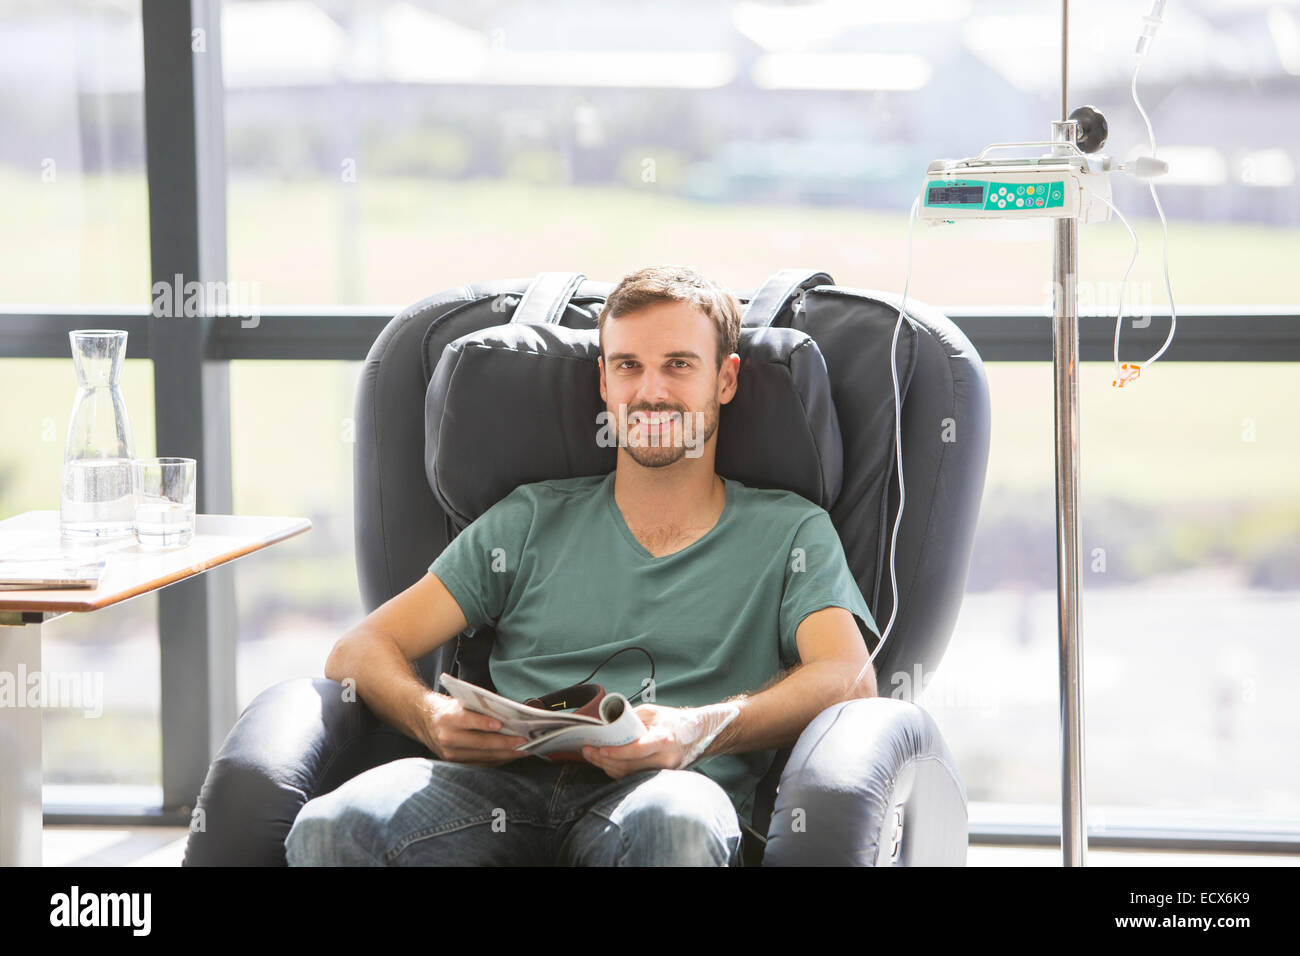 Portrait of smiling patient undergoing medical treatment in outpatient clinic Stock Photo